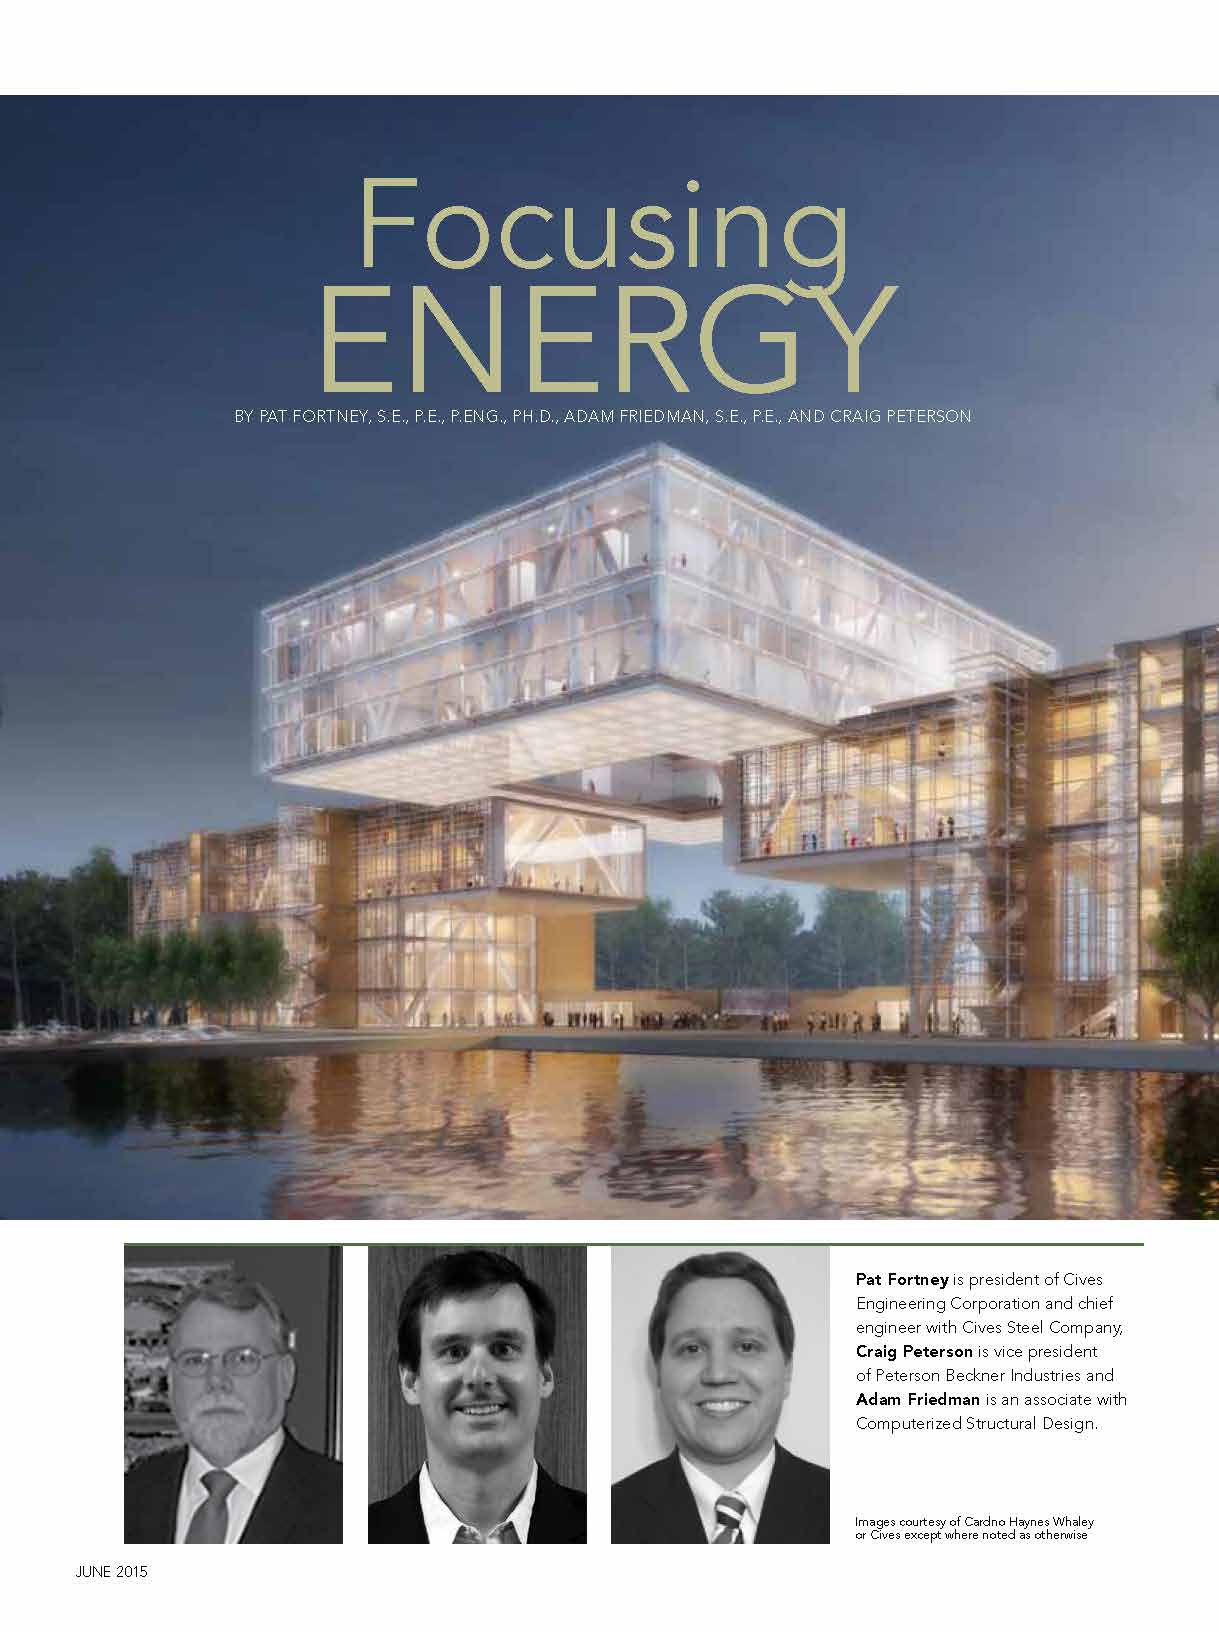 Modern Steel Construction - Focusing Energy | CSD Structural Engineers